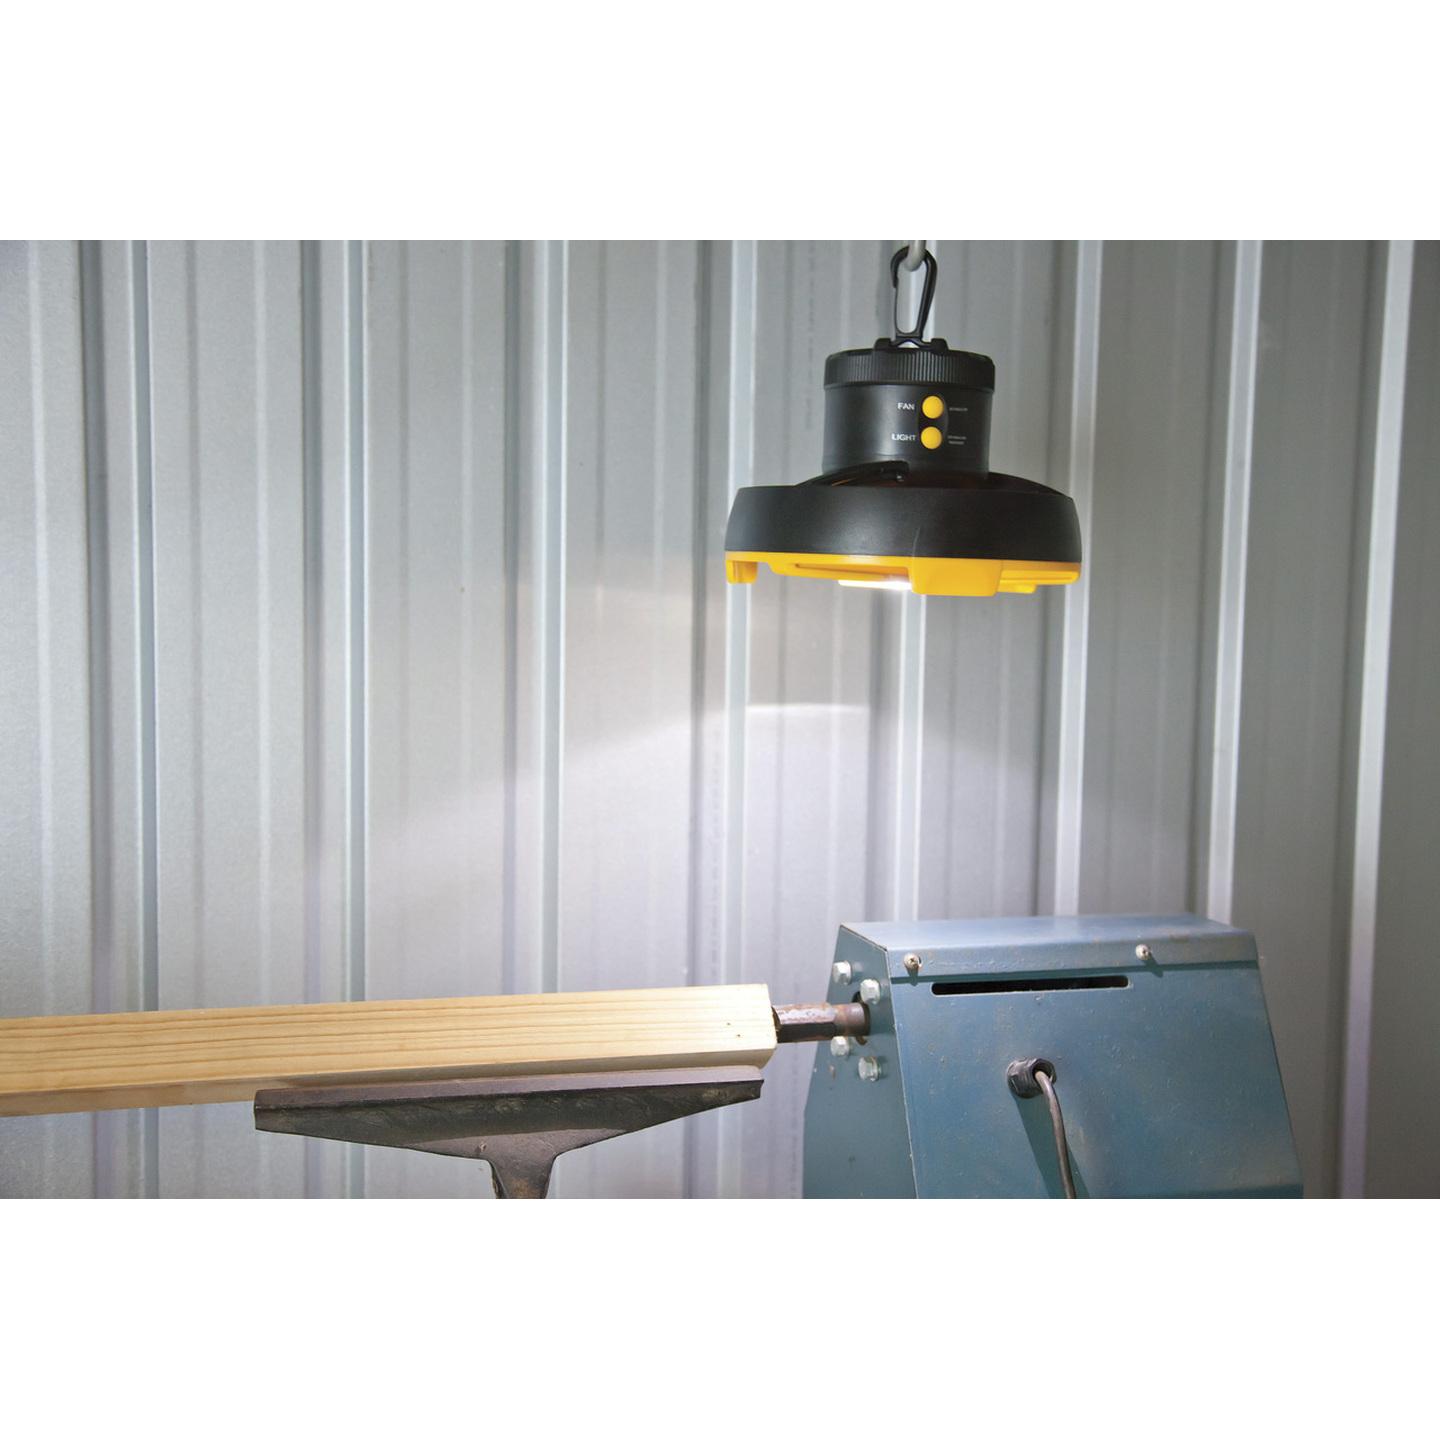 Portable Ceiling Fan and Light